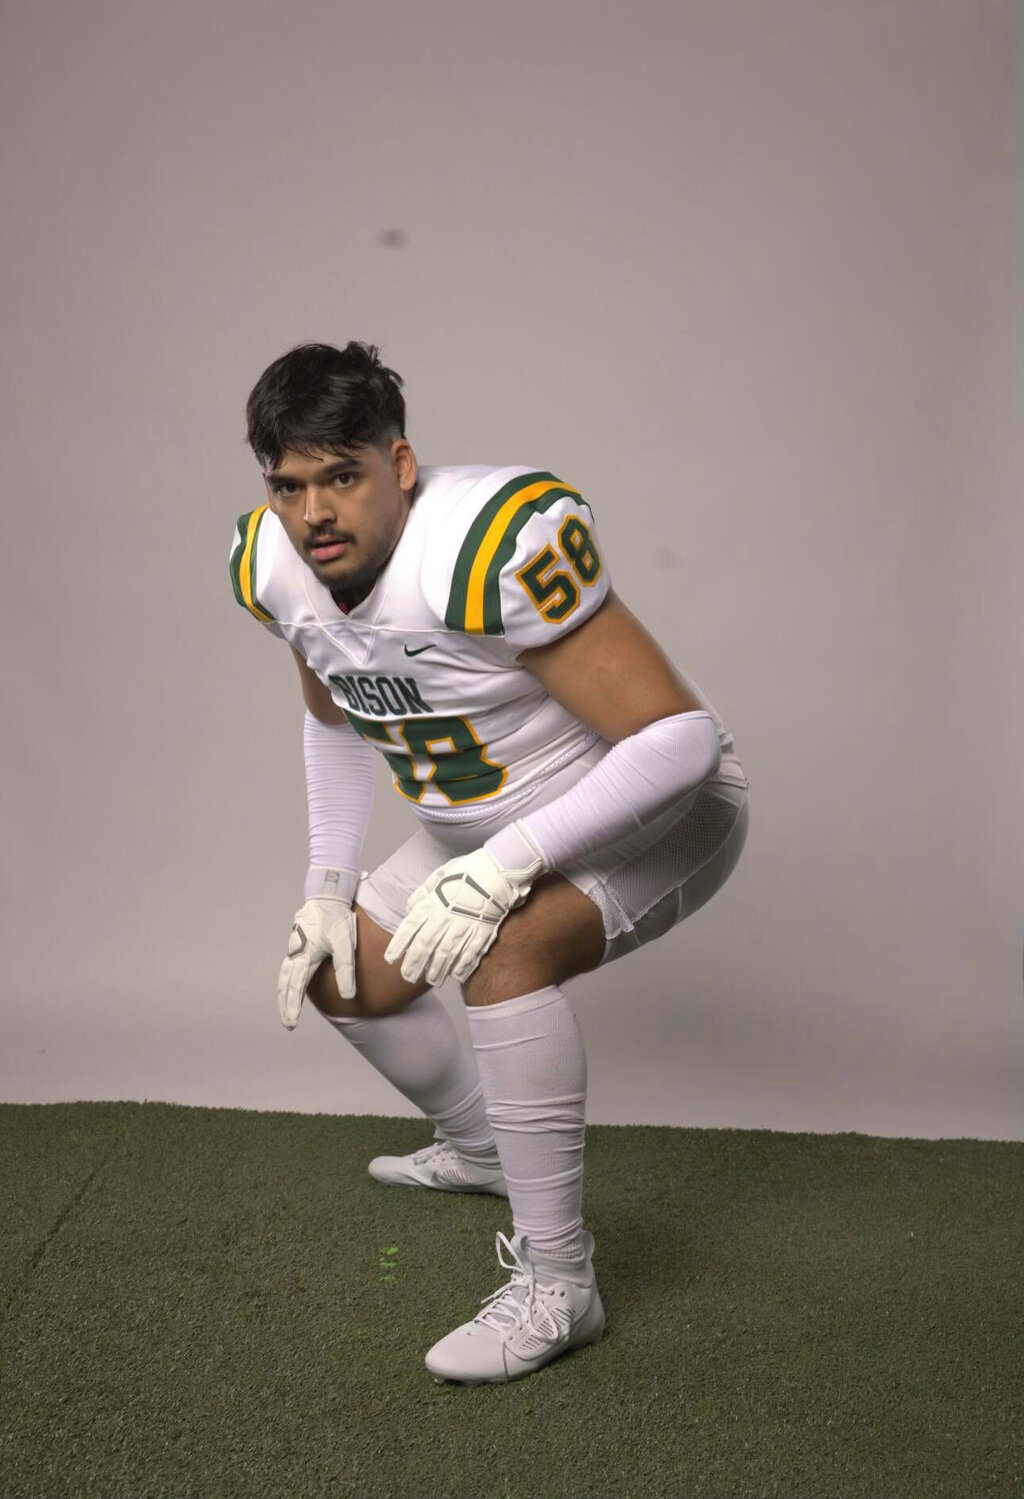 Yelm offensive lineman Kyle Kaaiwela poses for a photo during an official visit at Oklahoma Baptist University in mid-January.